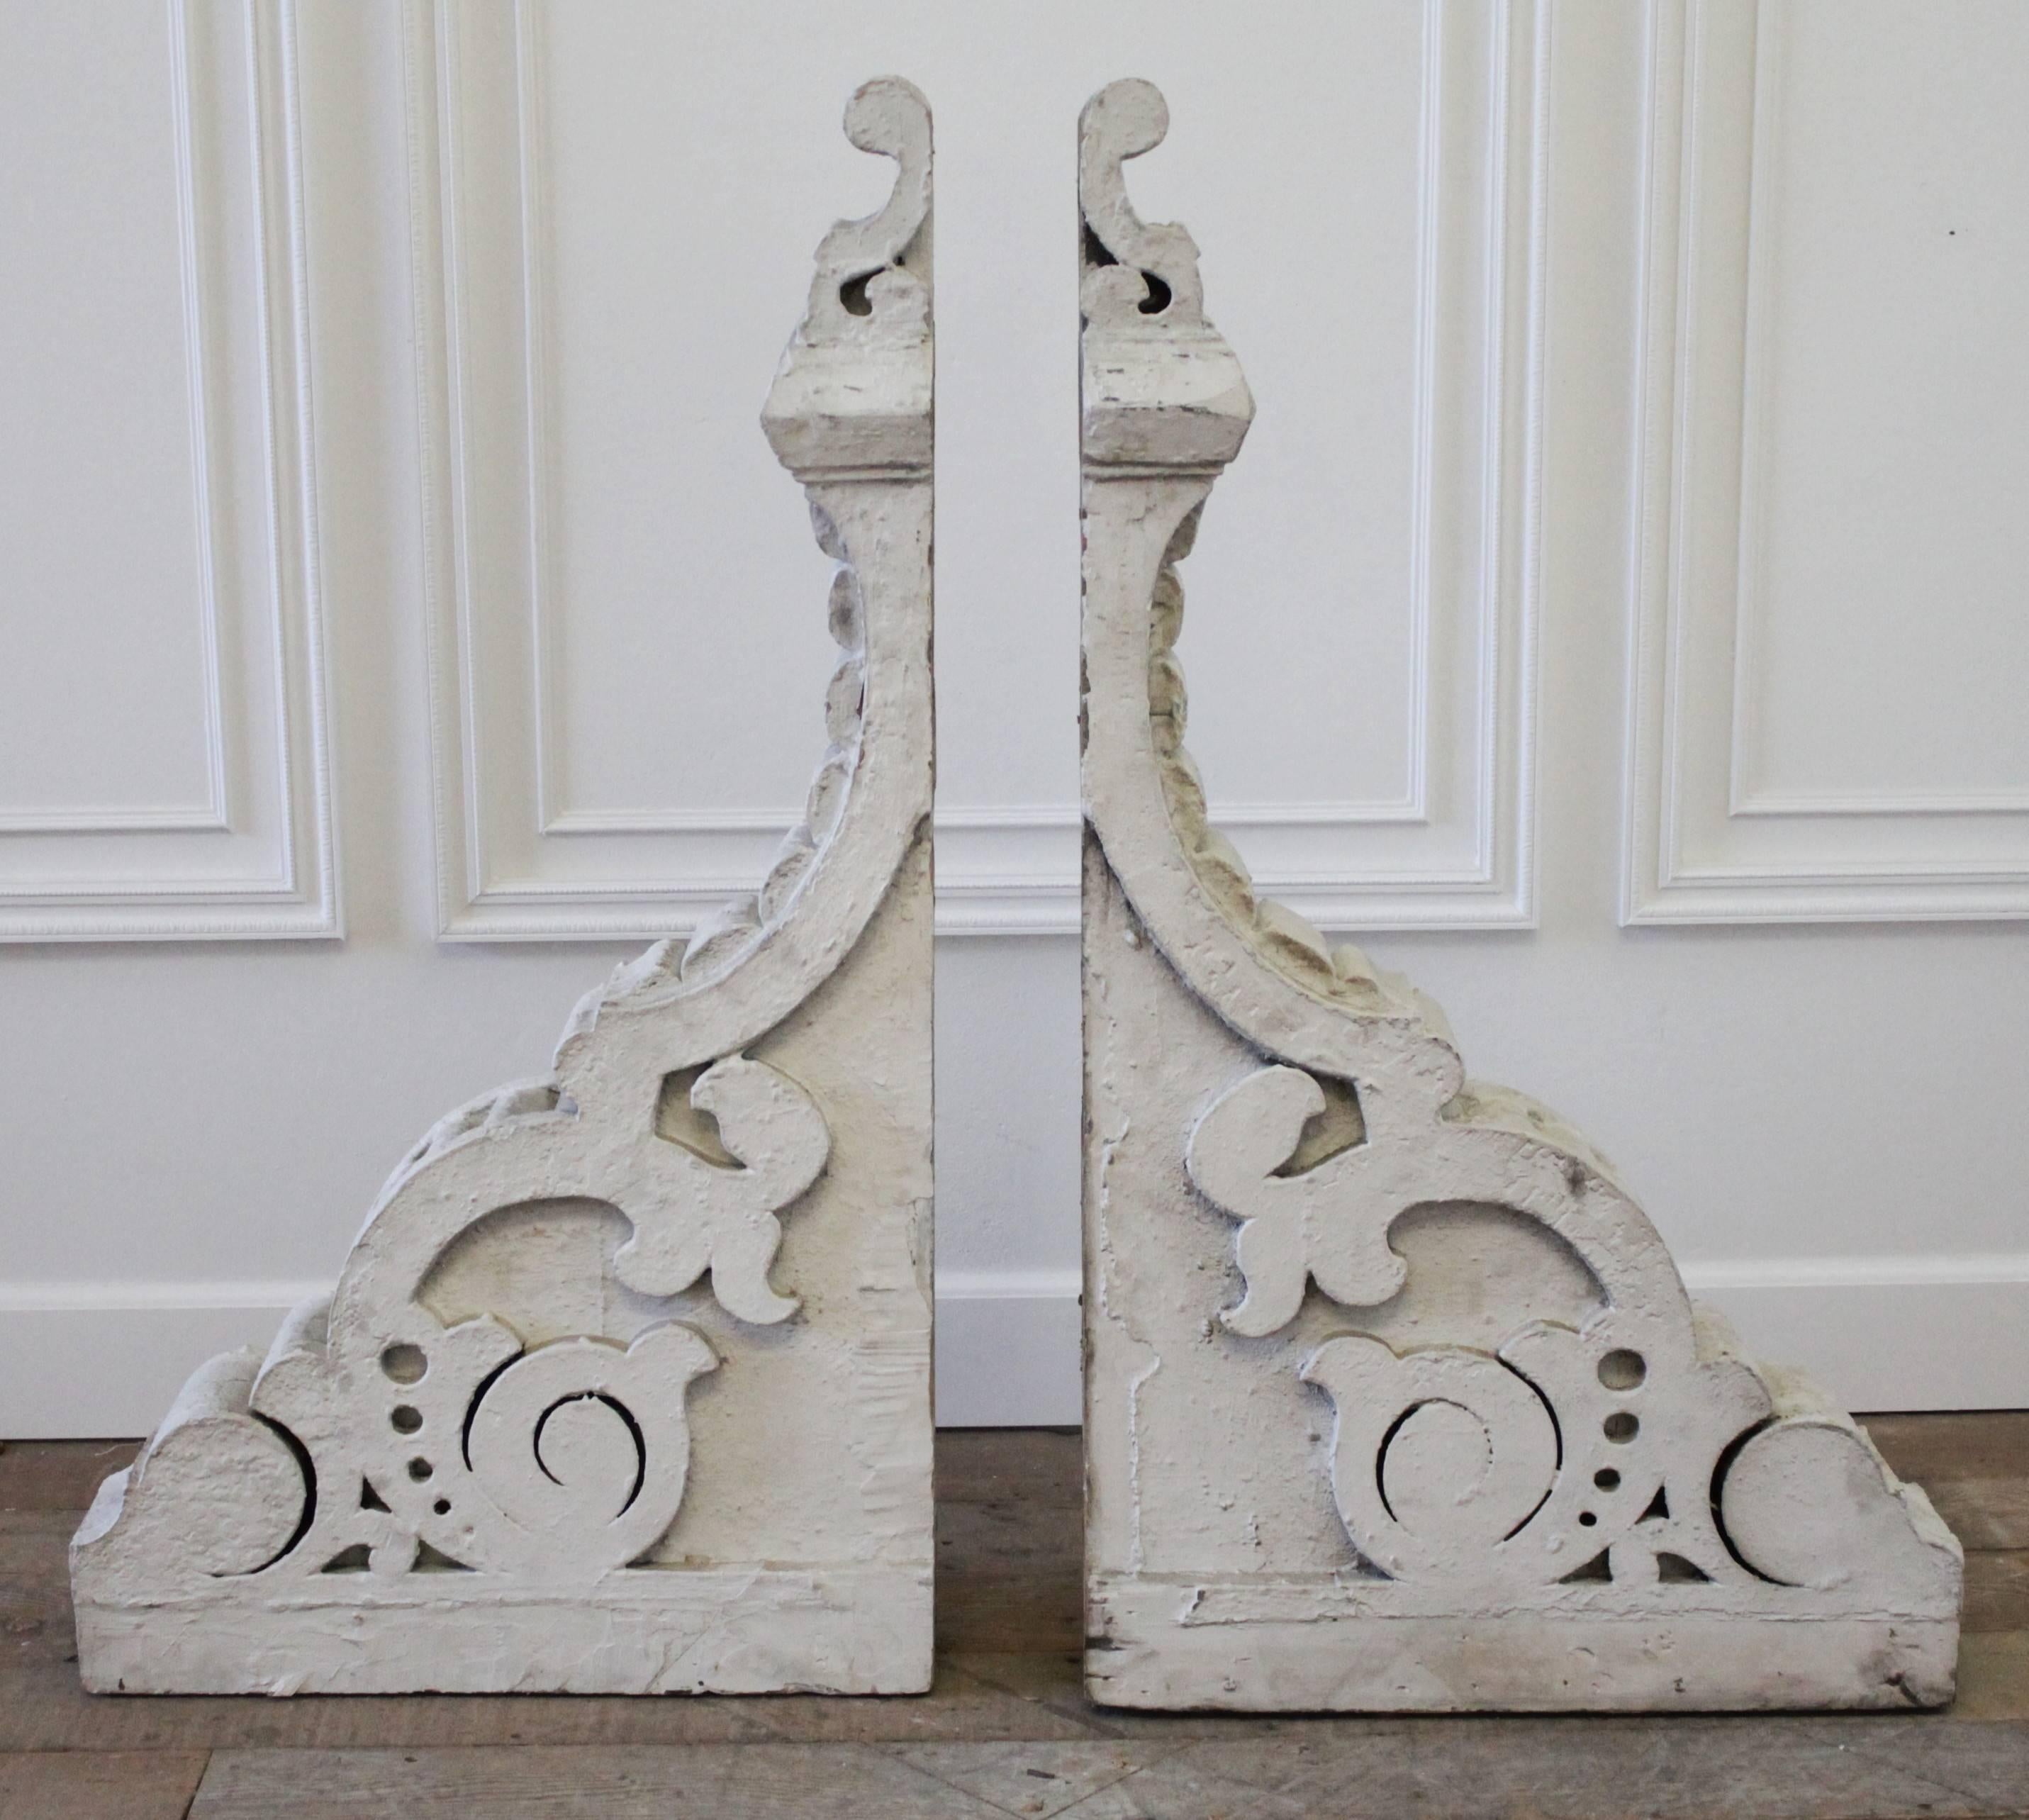 Fabulous pair of antique corbels, original white paint. Solid and heavy, great to use anywhere in the home to add architectural details.
Measures: 46